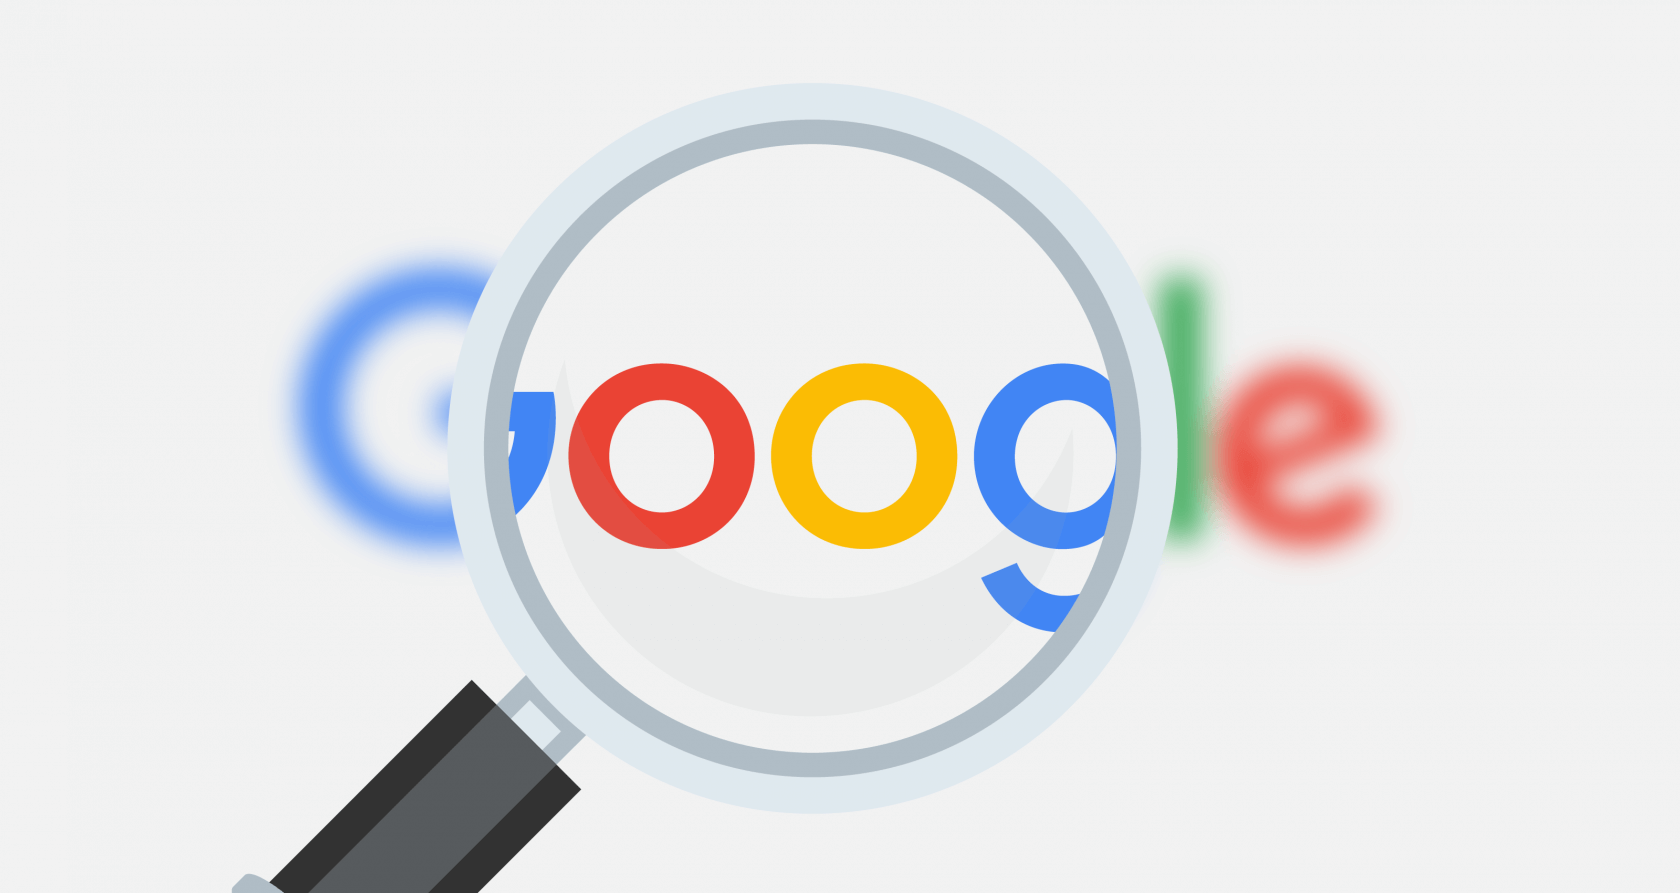 Google promises to 'experiment' with Search results following ad backlash